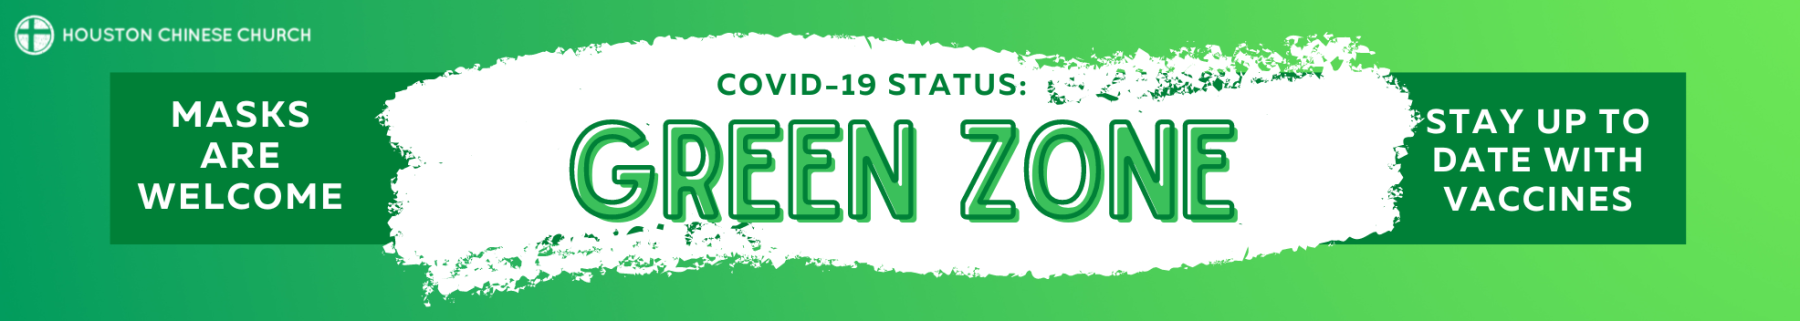 Current HCC COVID-19 Status is green zone.